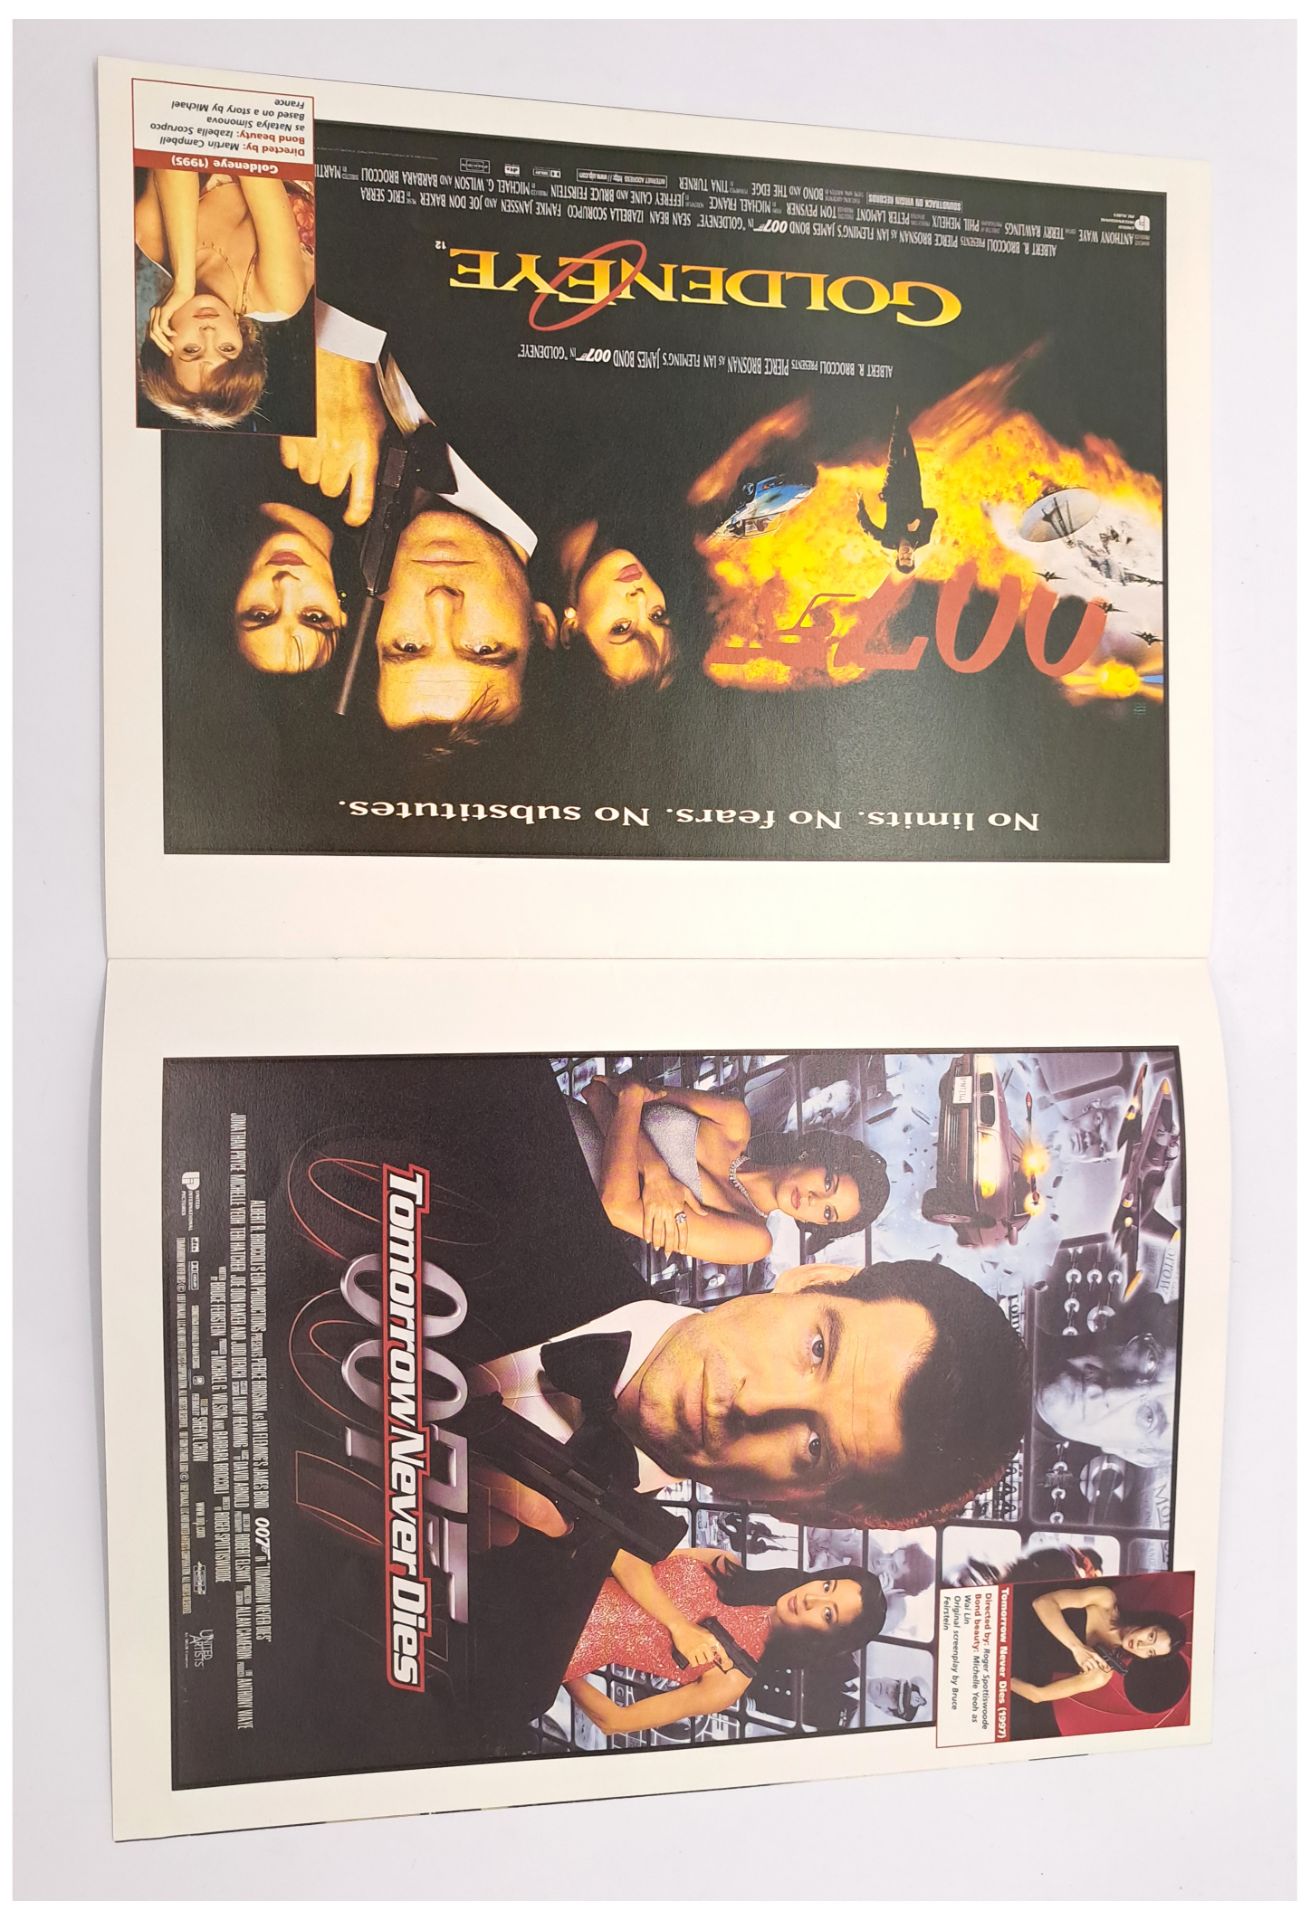 James Bond 007 The Man with the Golden Gun Lobby Cards/Stills & The Complete James Bond Poster Co... - Image 3 of 3